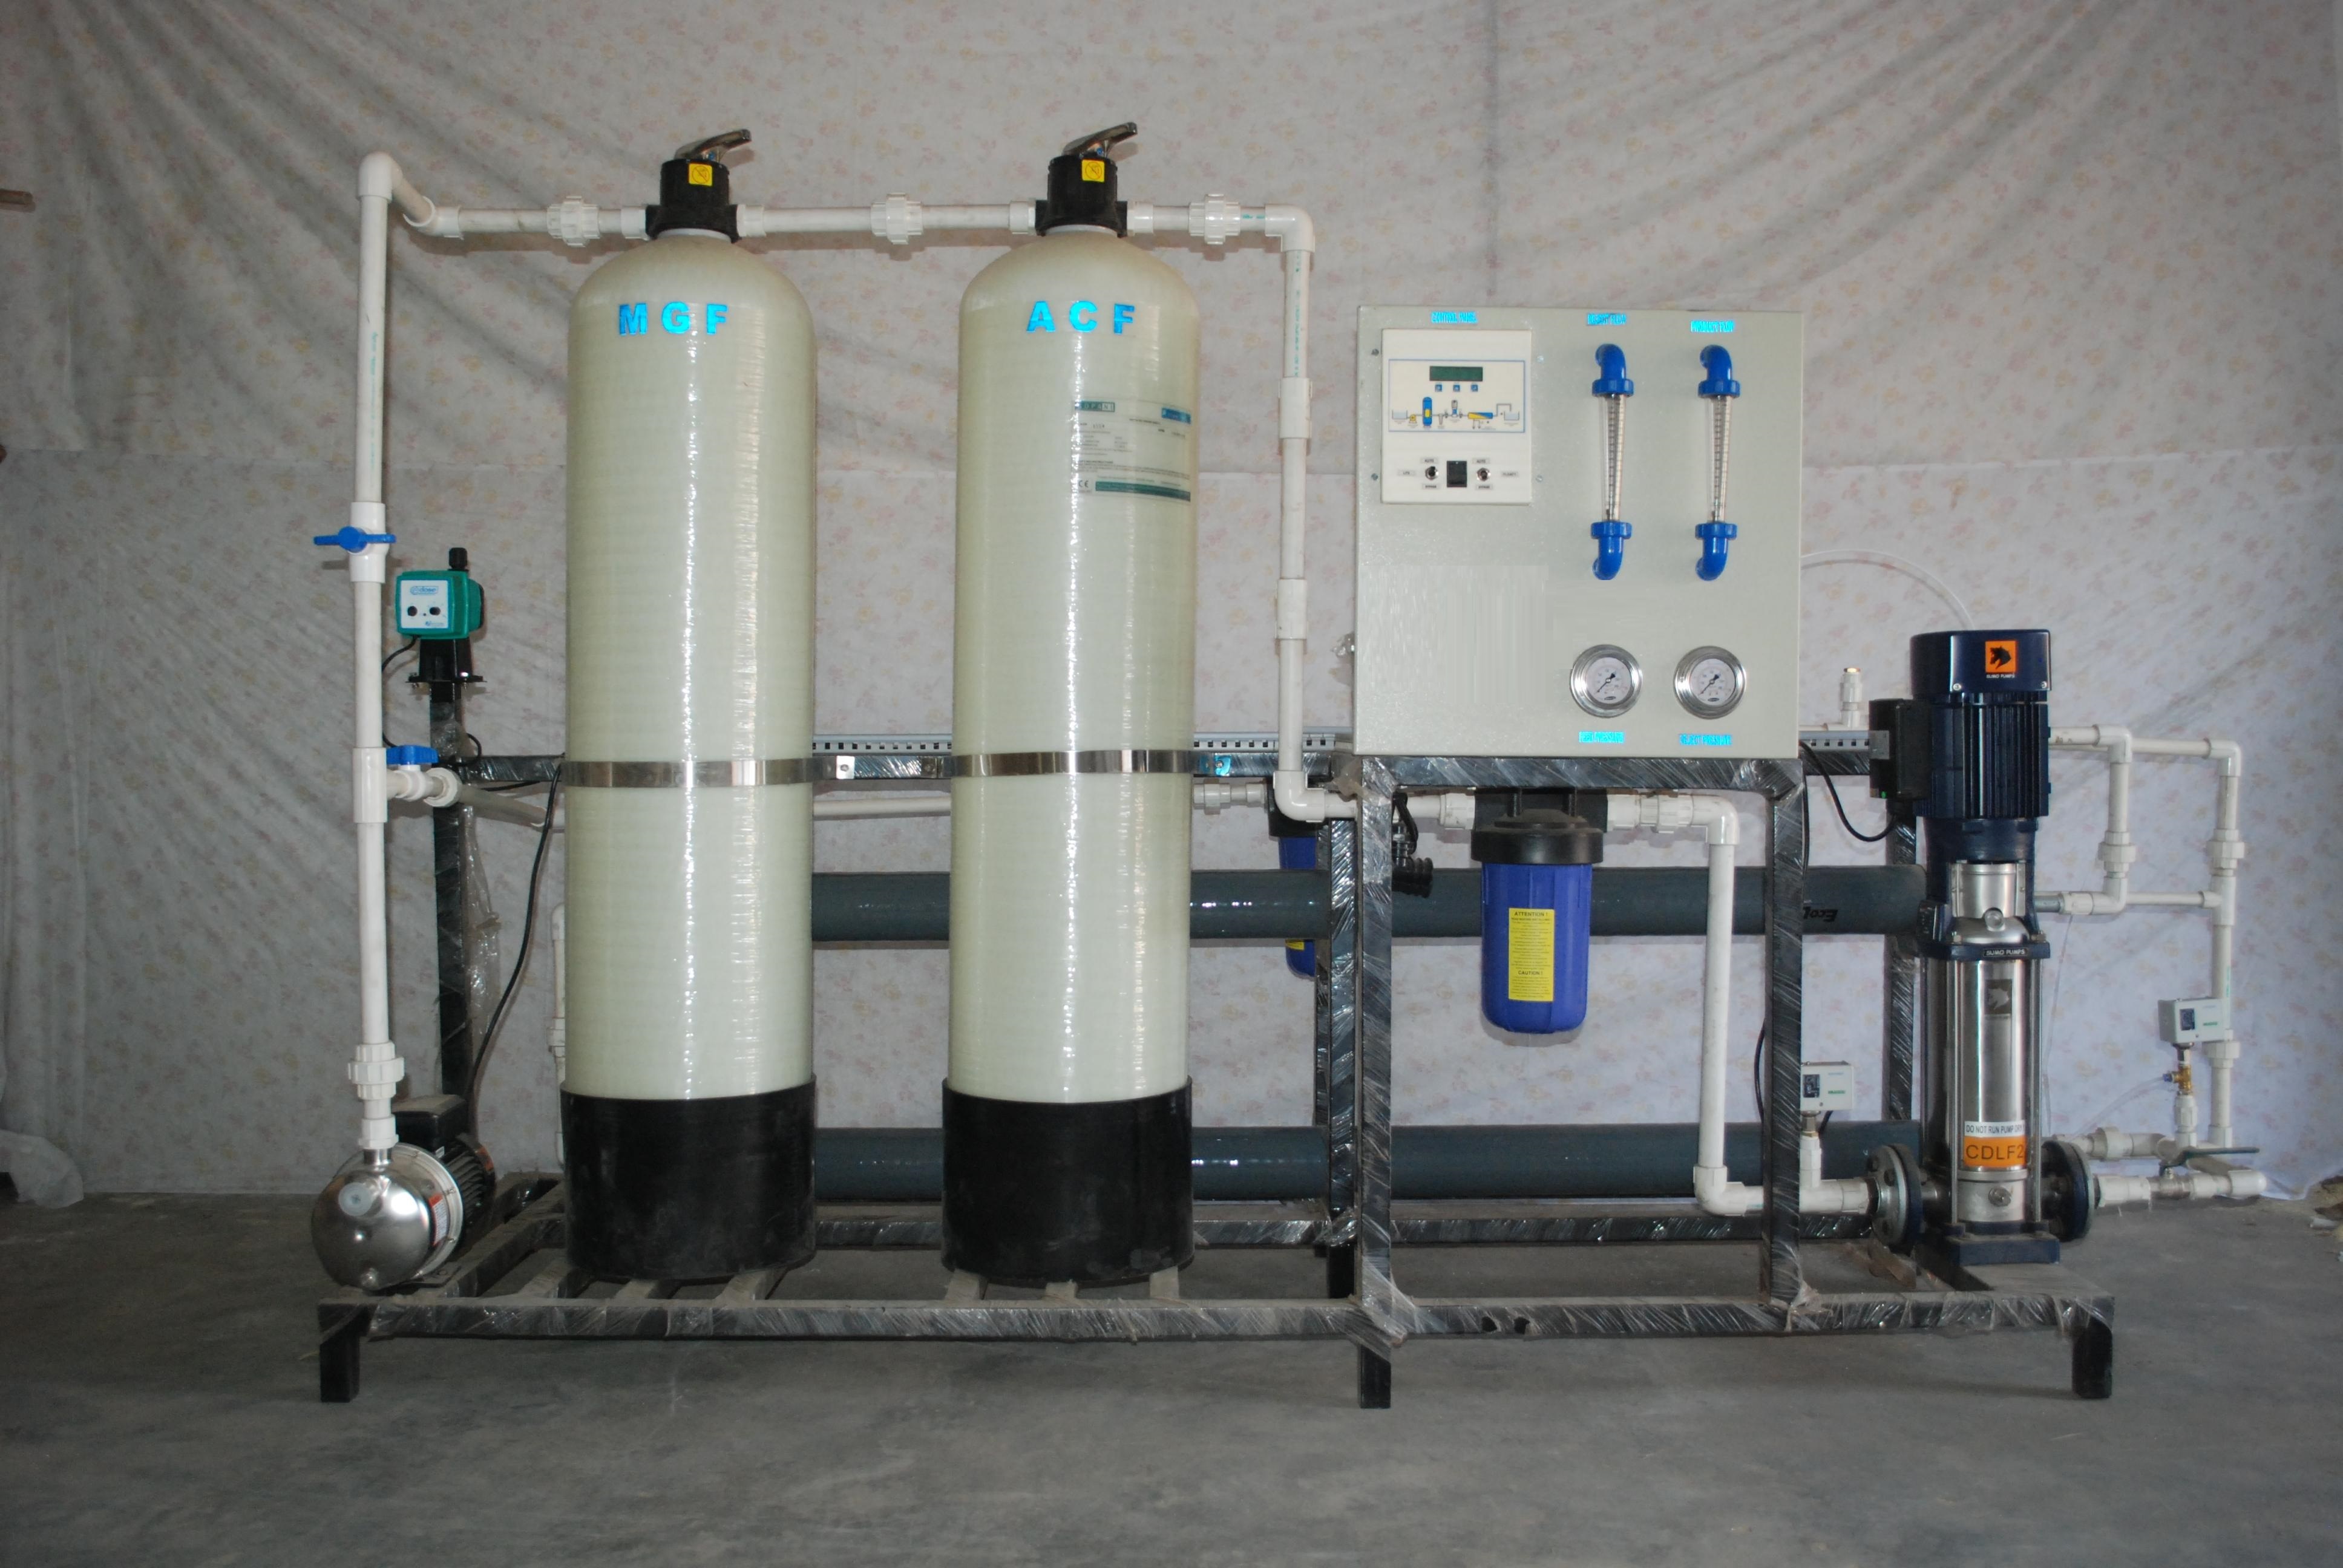 Mineral Water ISI Project (Capacity: 2000 - 20000 LPH)